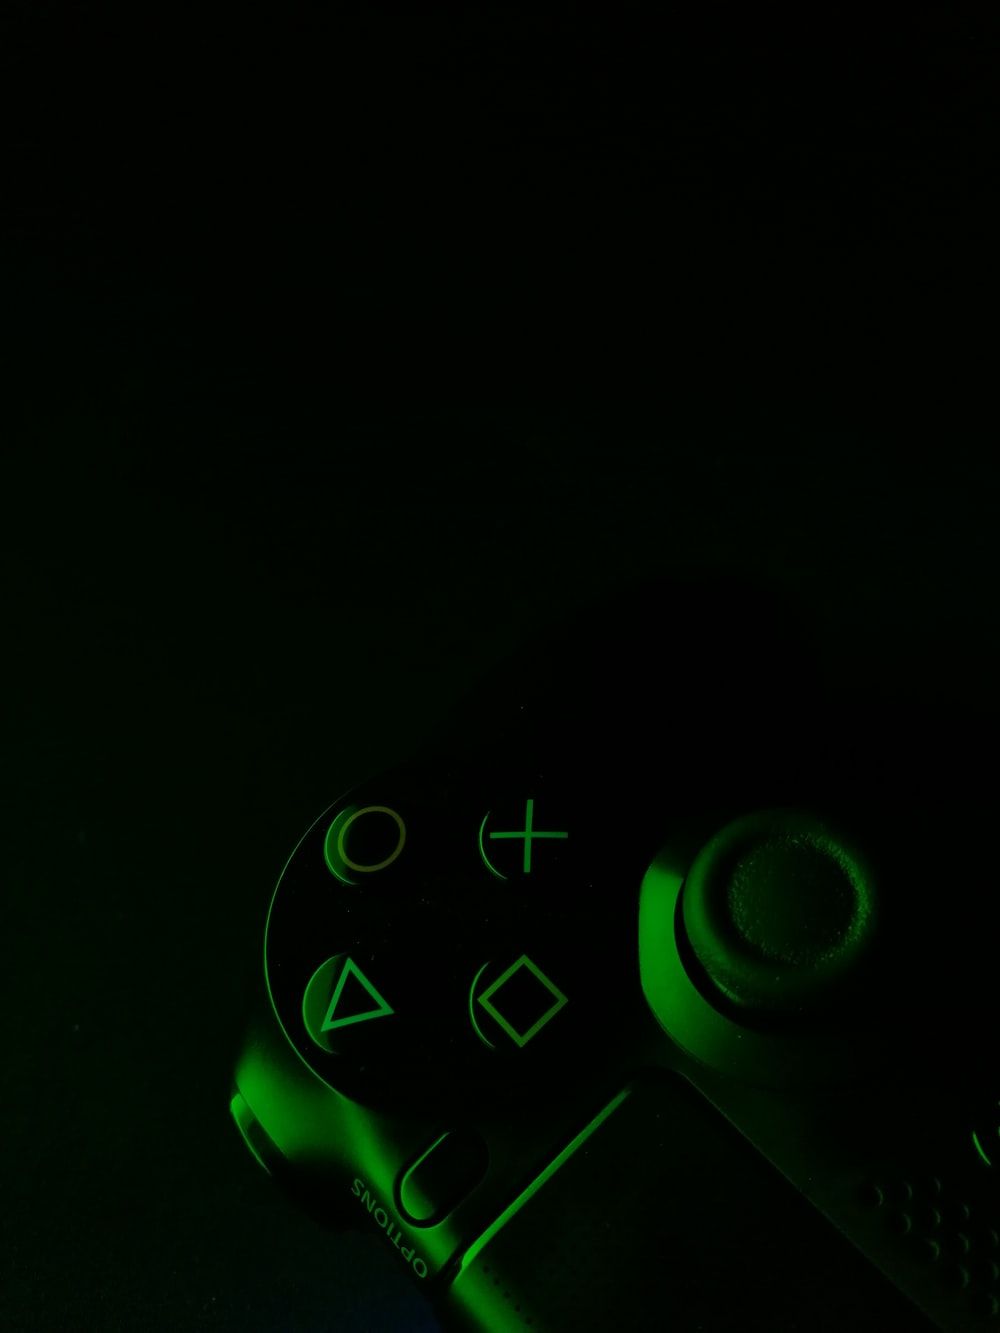 green and black game controller in dimmed light photo